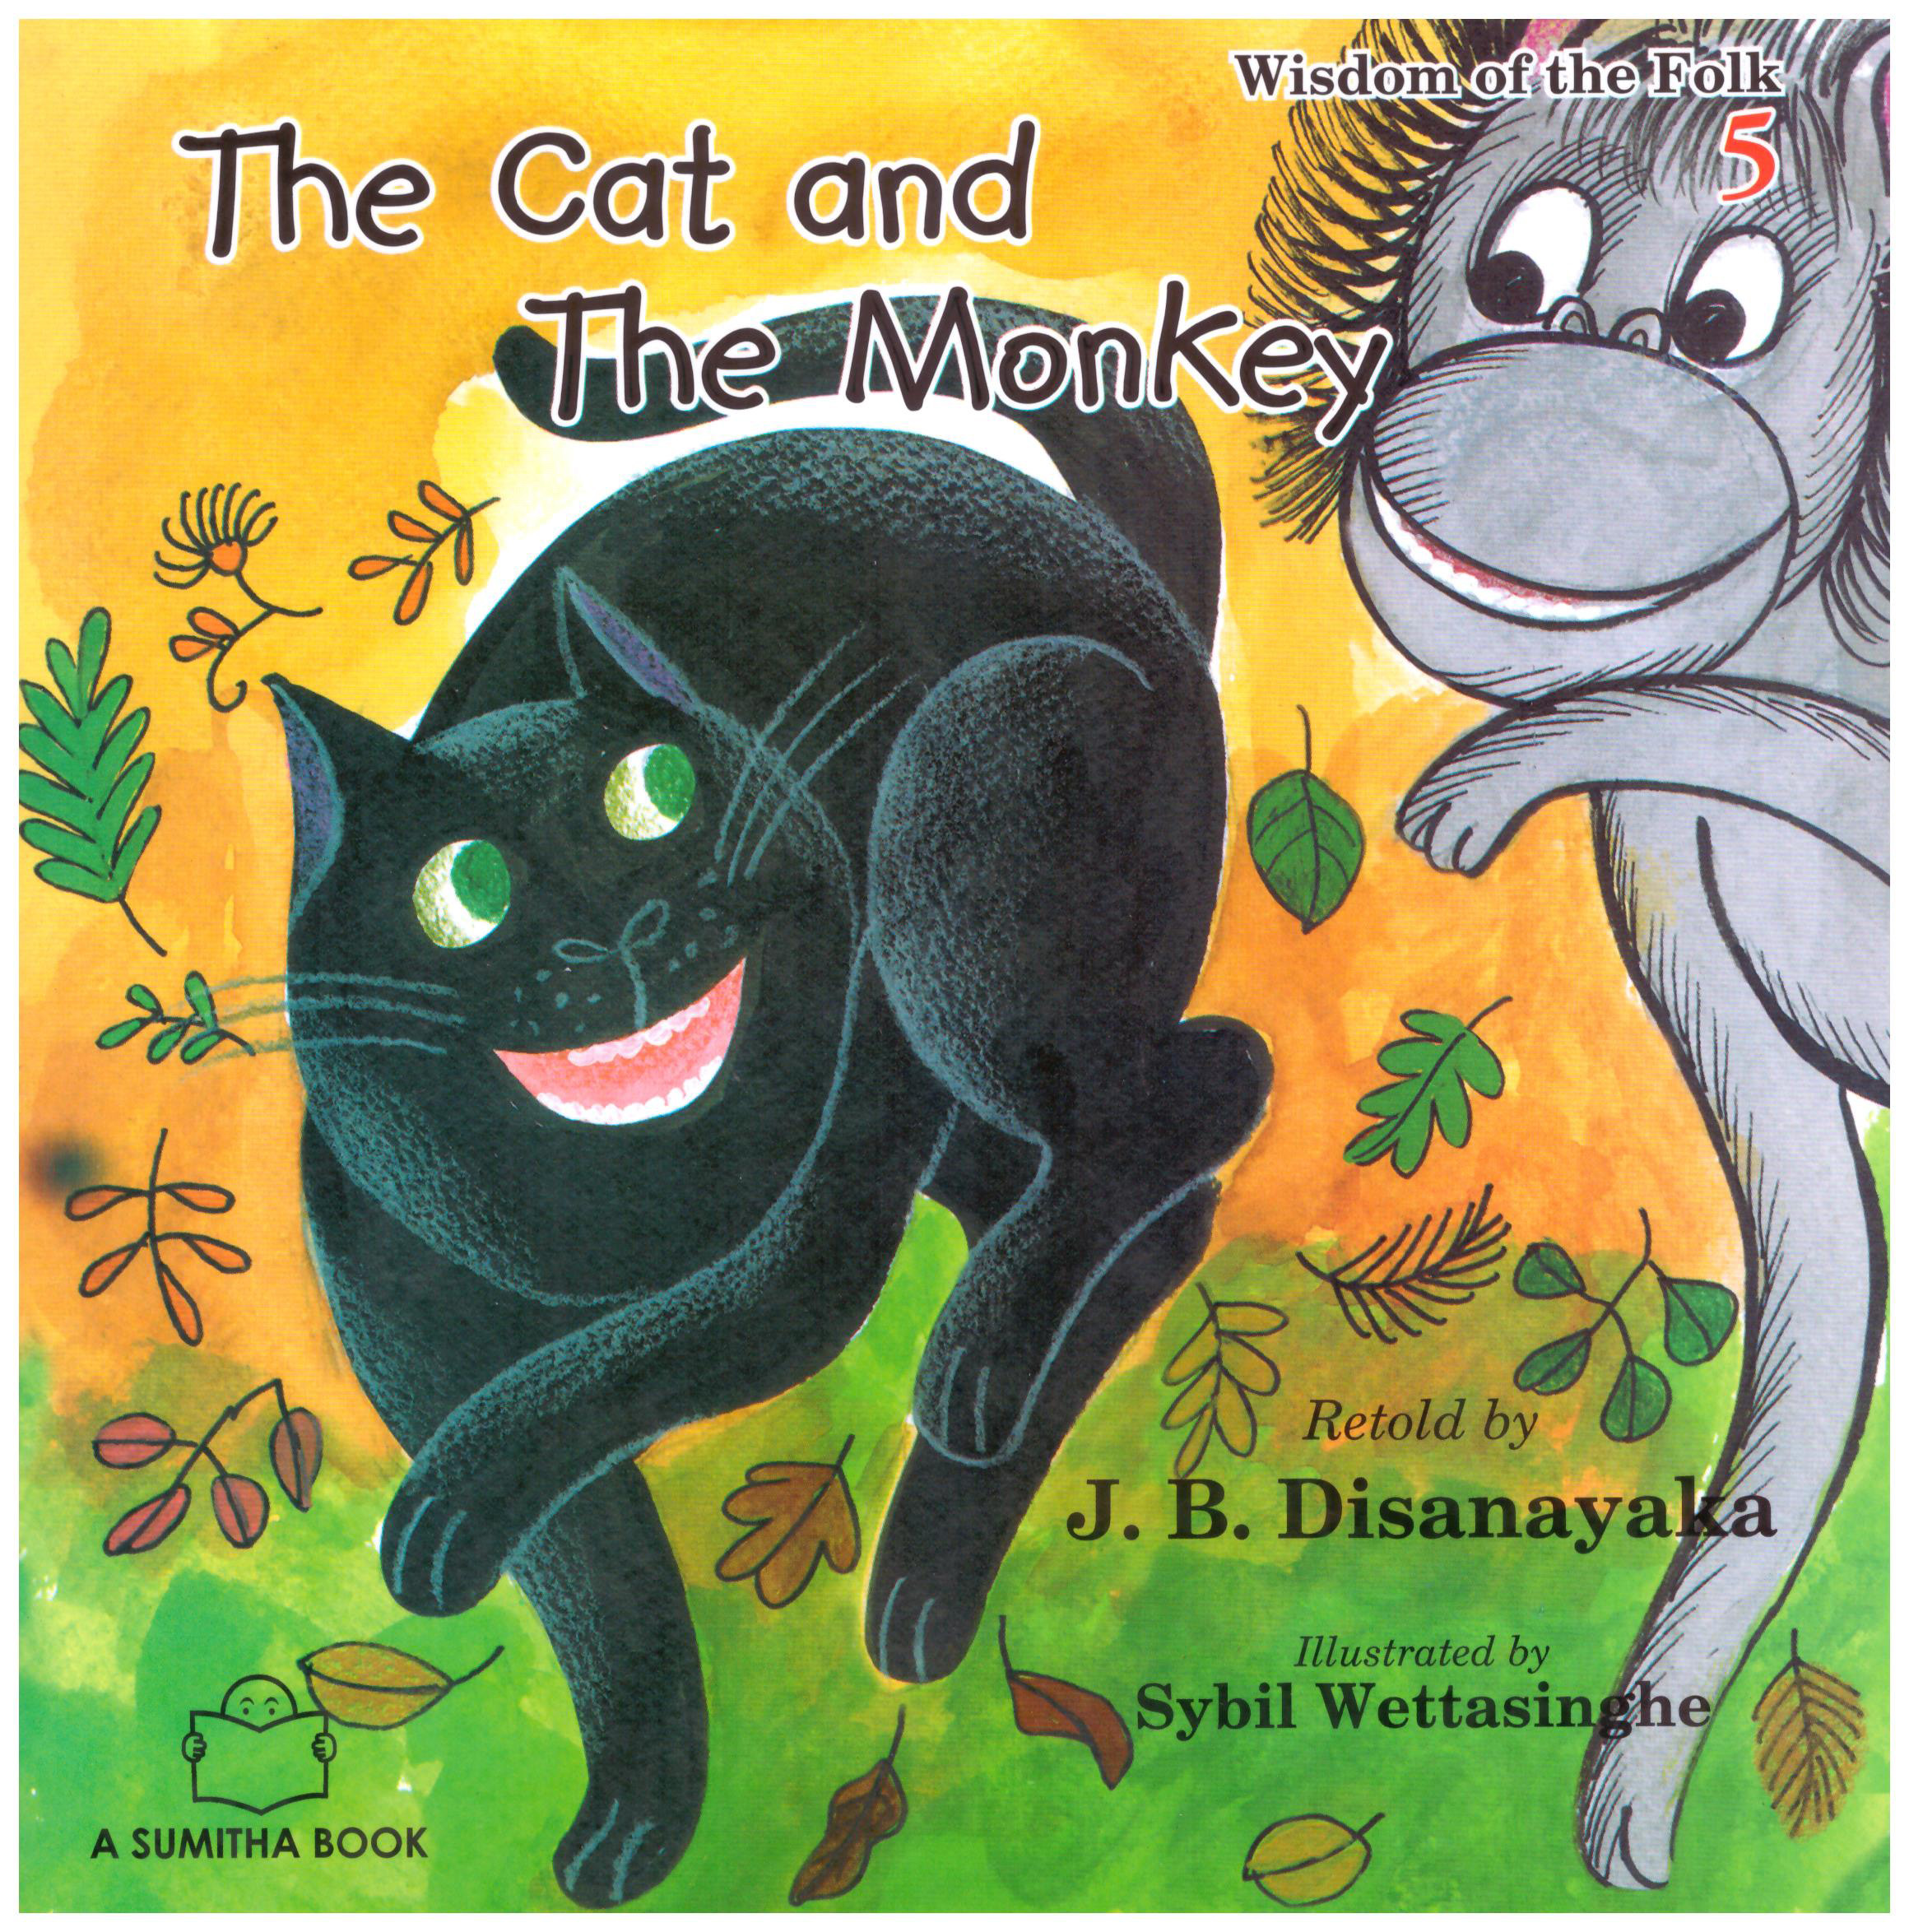 Wisdom of the Folk 5 - The Cat And The Monkey 